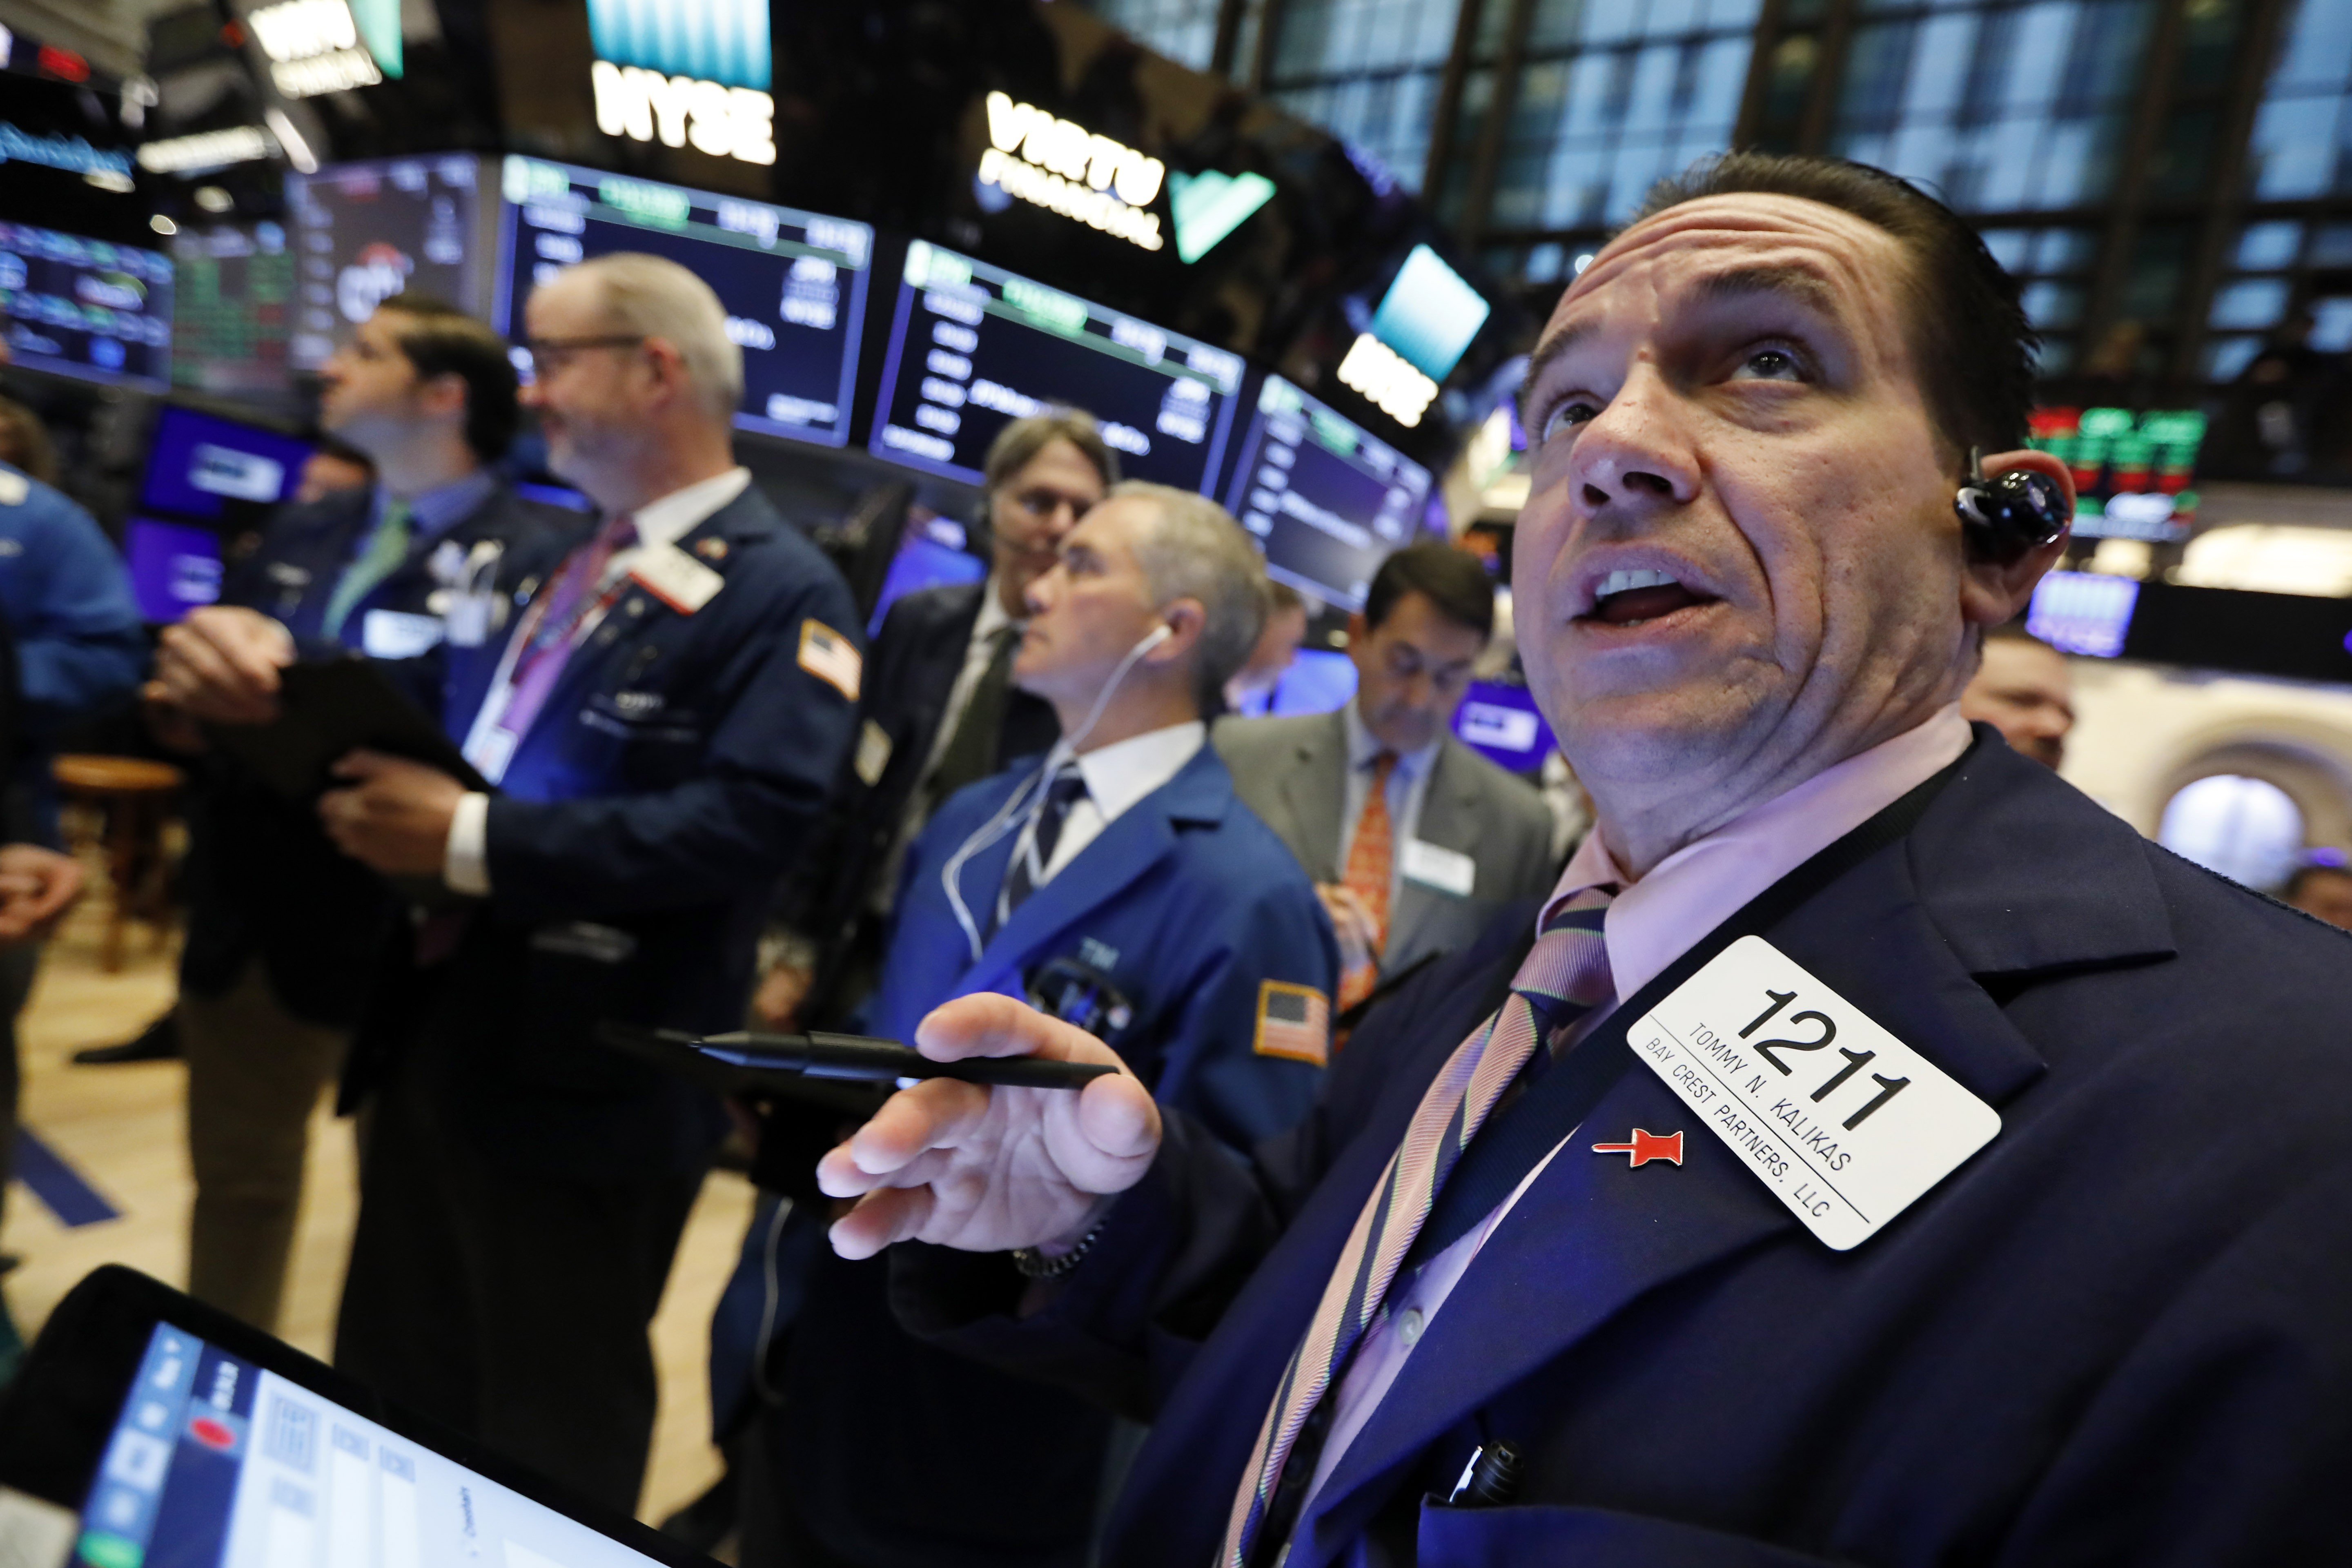 After a sobering end to 2018, markets have revved up again, with the Nasdaq and S&P 500 rallying to record closing highs on April 23. Photo: AP